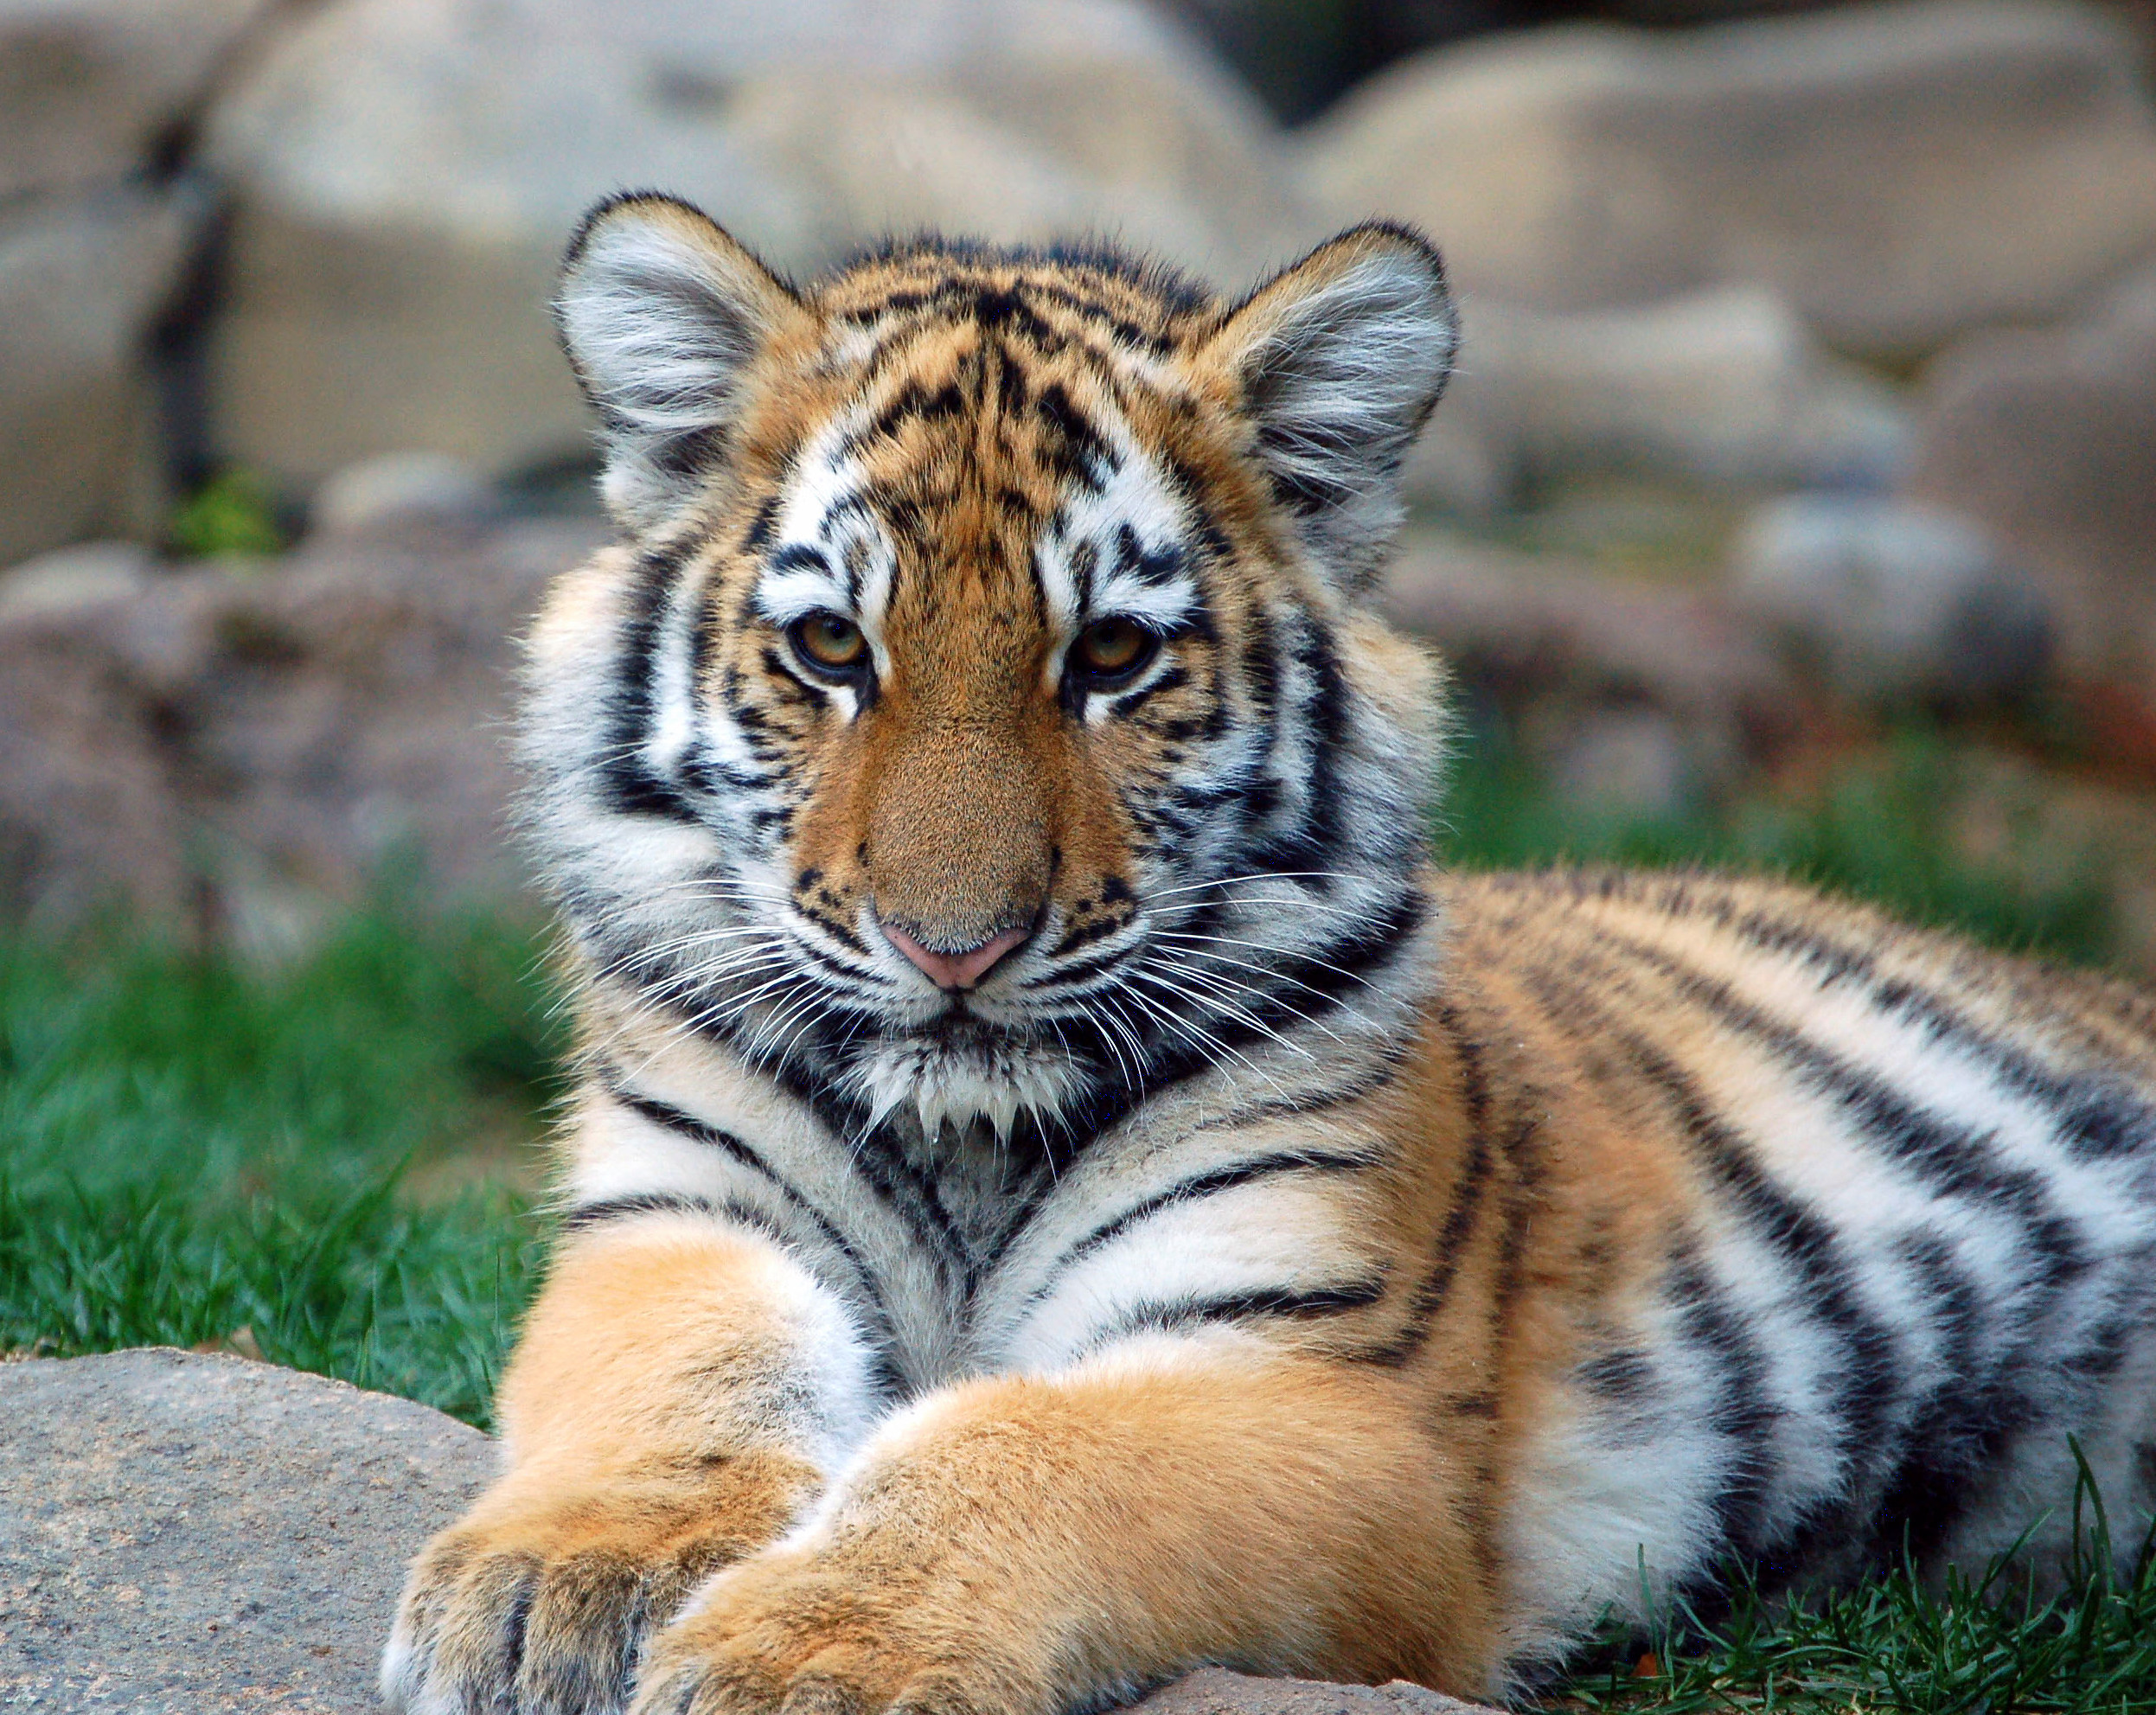 Young Tiger Picture Of Animals # 2493x1983. All For Desktop